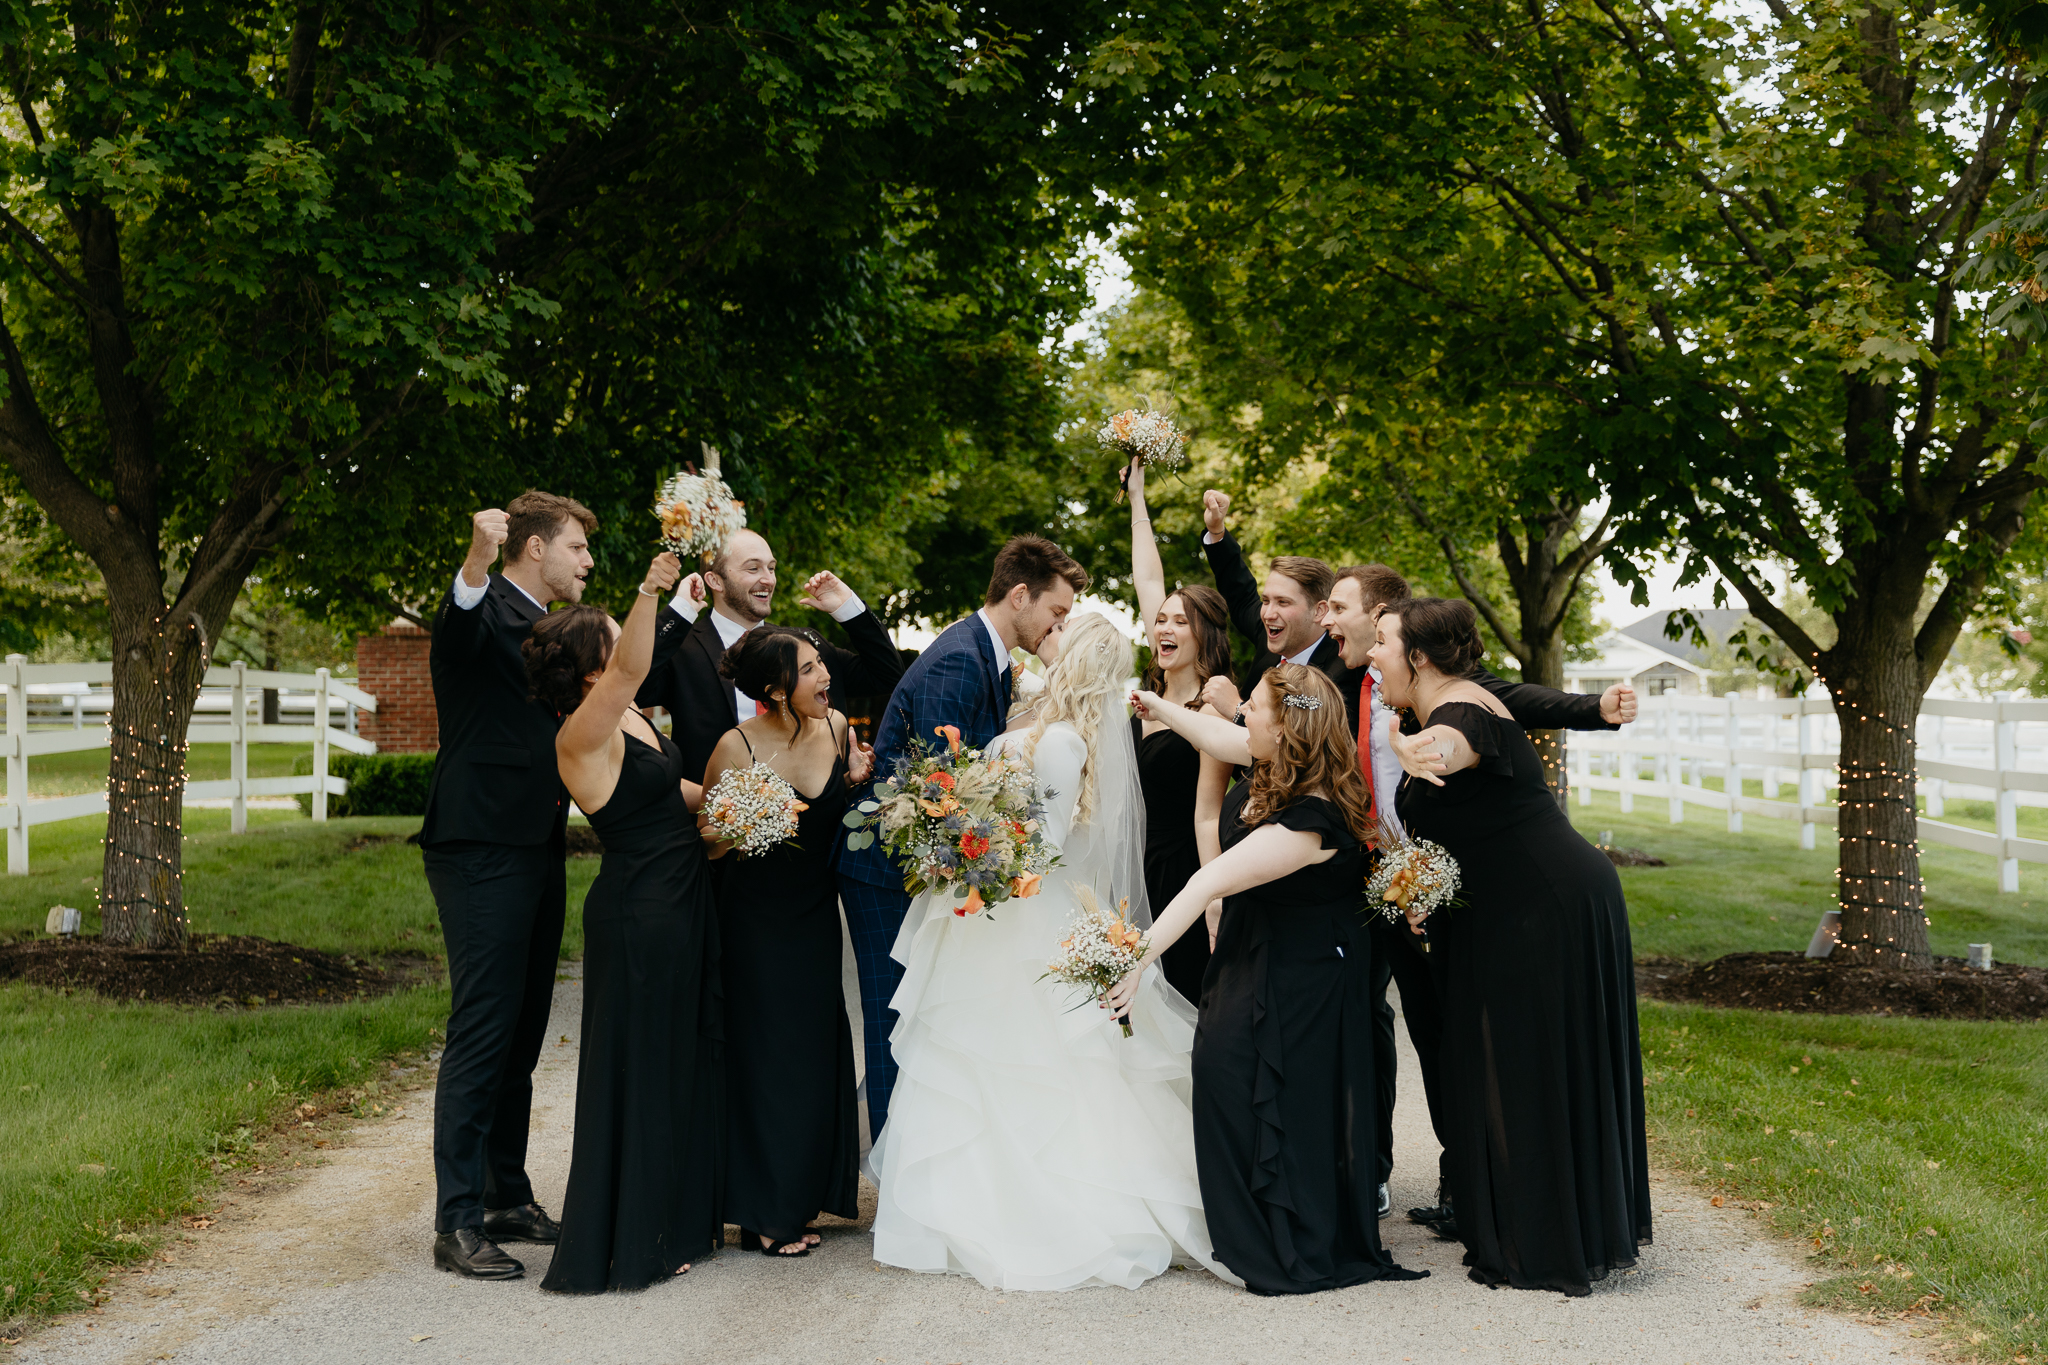 Wedding party of bridesmaids and groomsmen cheer as groom and bride kiss in a tree lined driveway at Northfork Farm